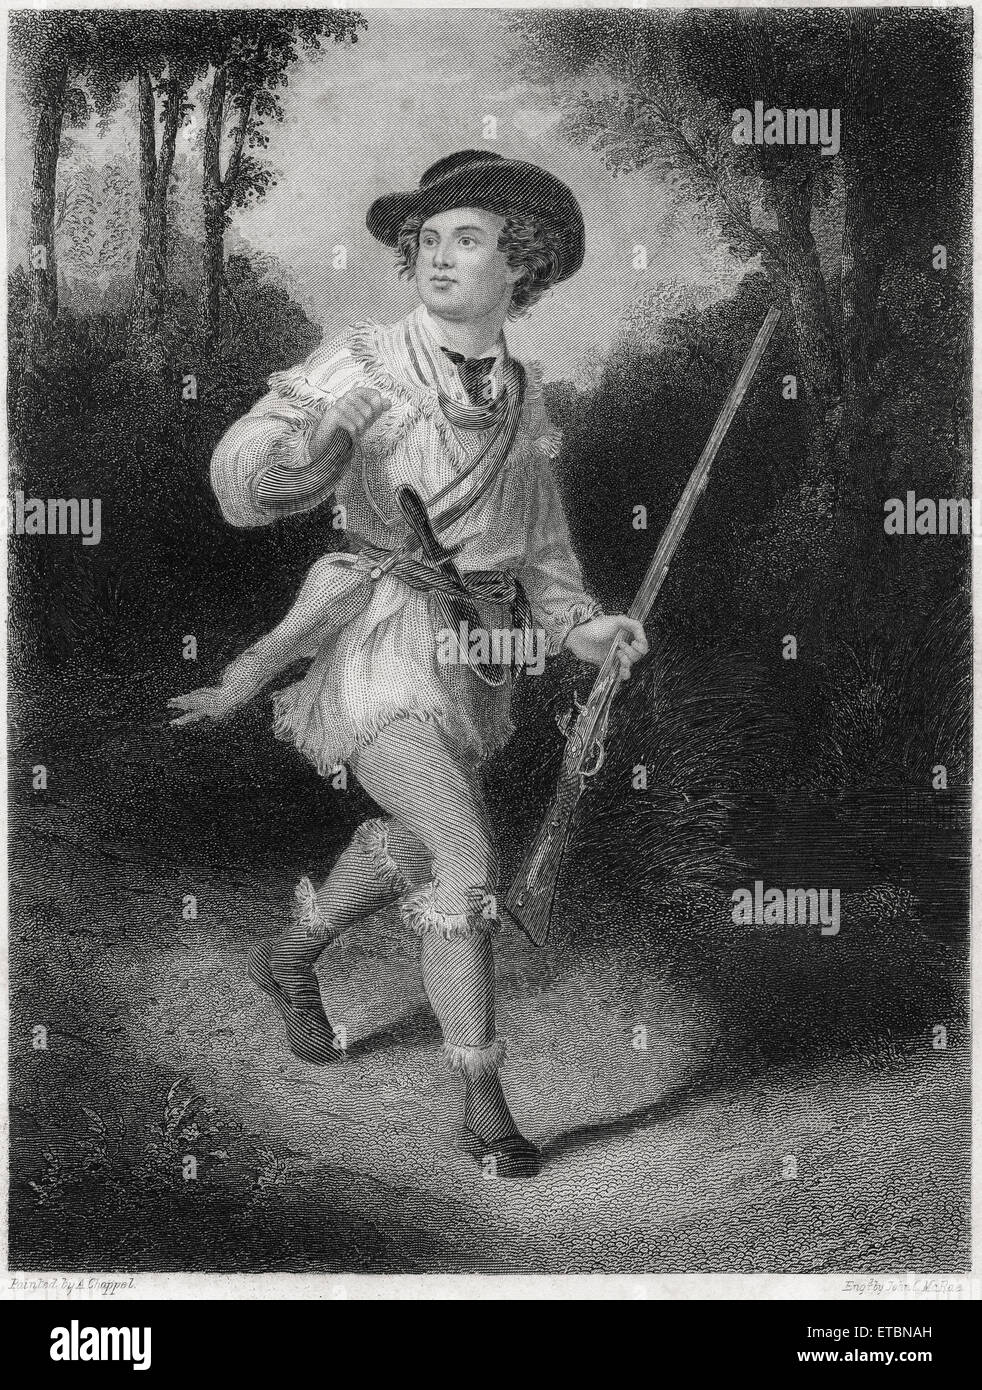 Morgan’s Rifleman, South, Painted by Alonzo Chappell, Engraving by John C. McRae, circa 1880 Stock Photo